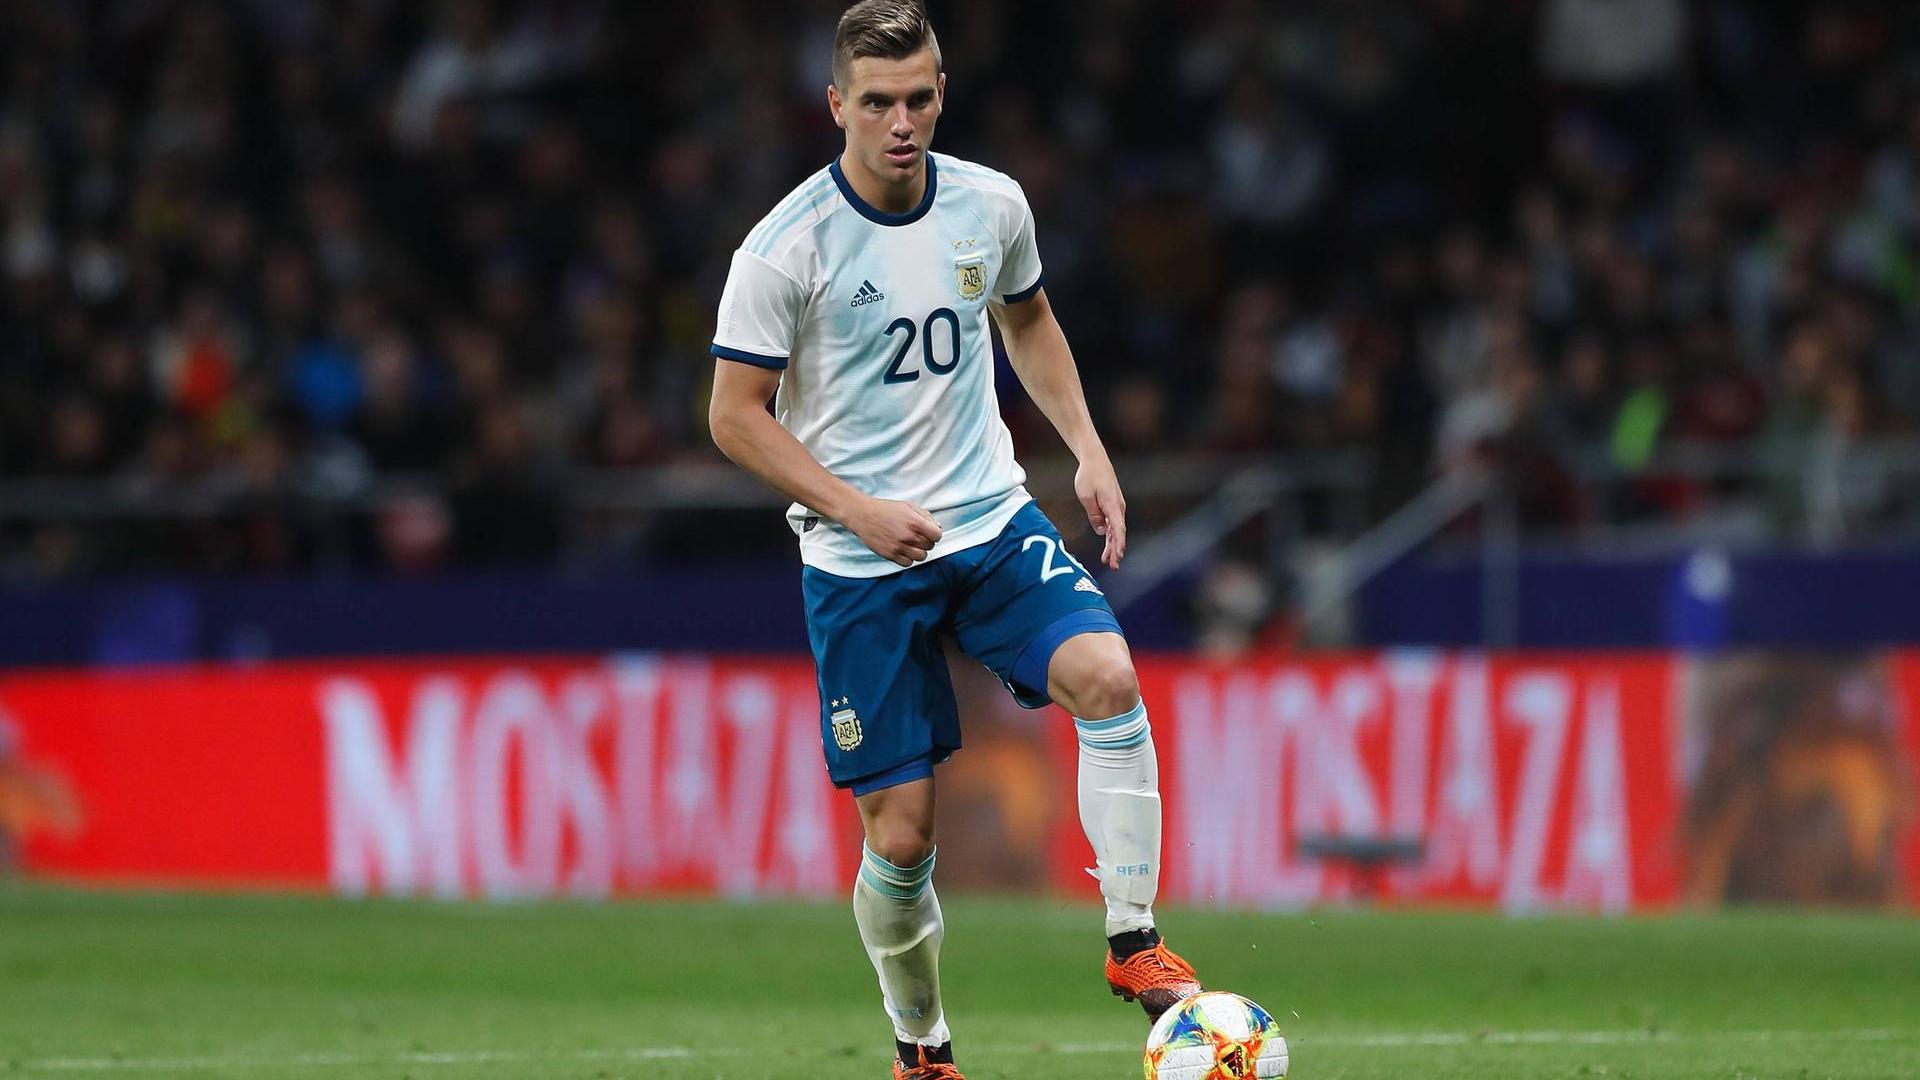 Bayern Munich has possibly the Argentinian star Giovani Lo Celso in the cross hairs